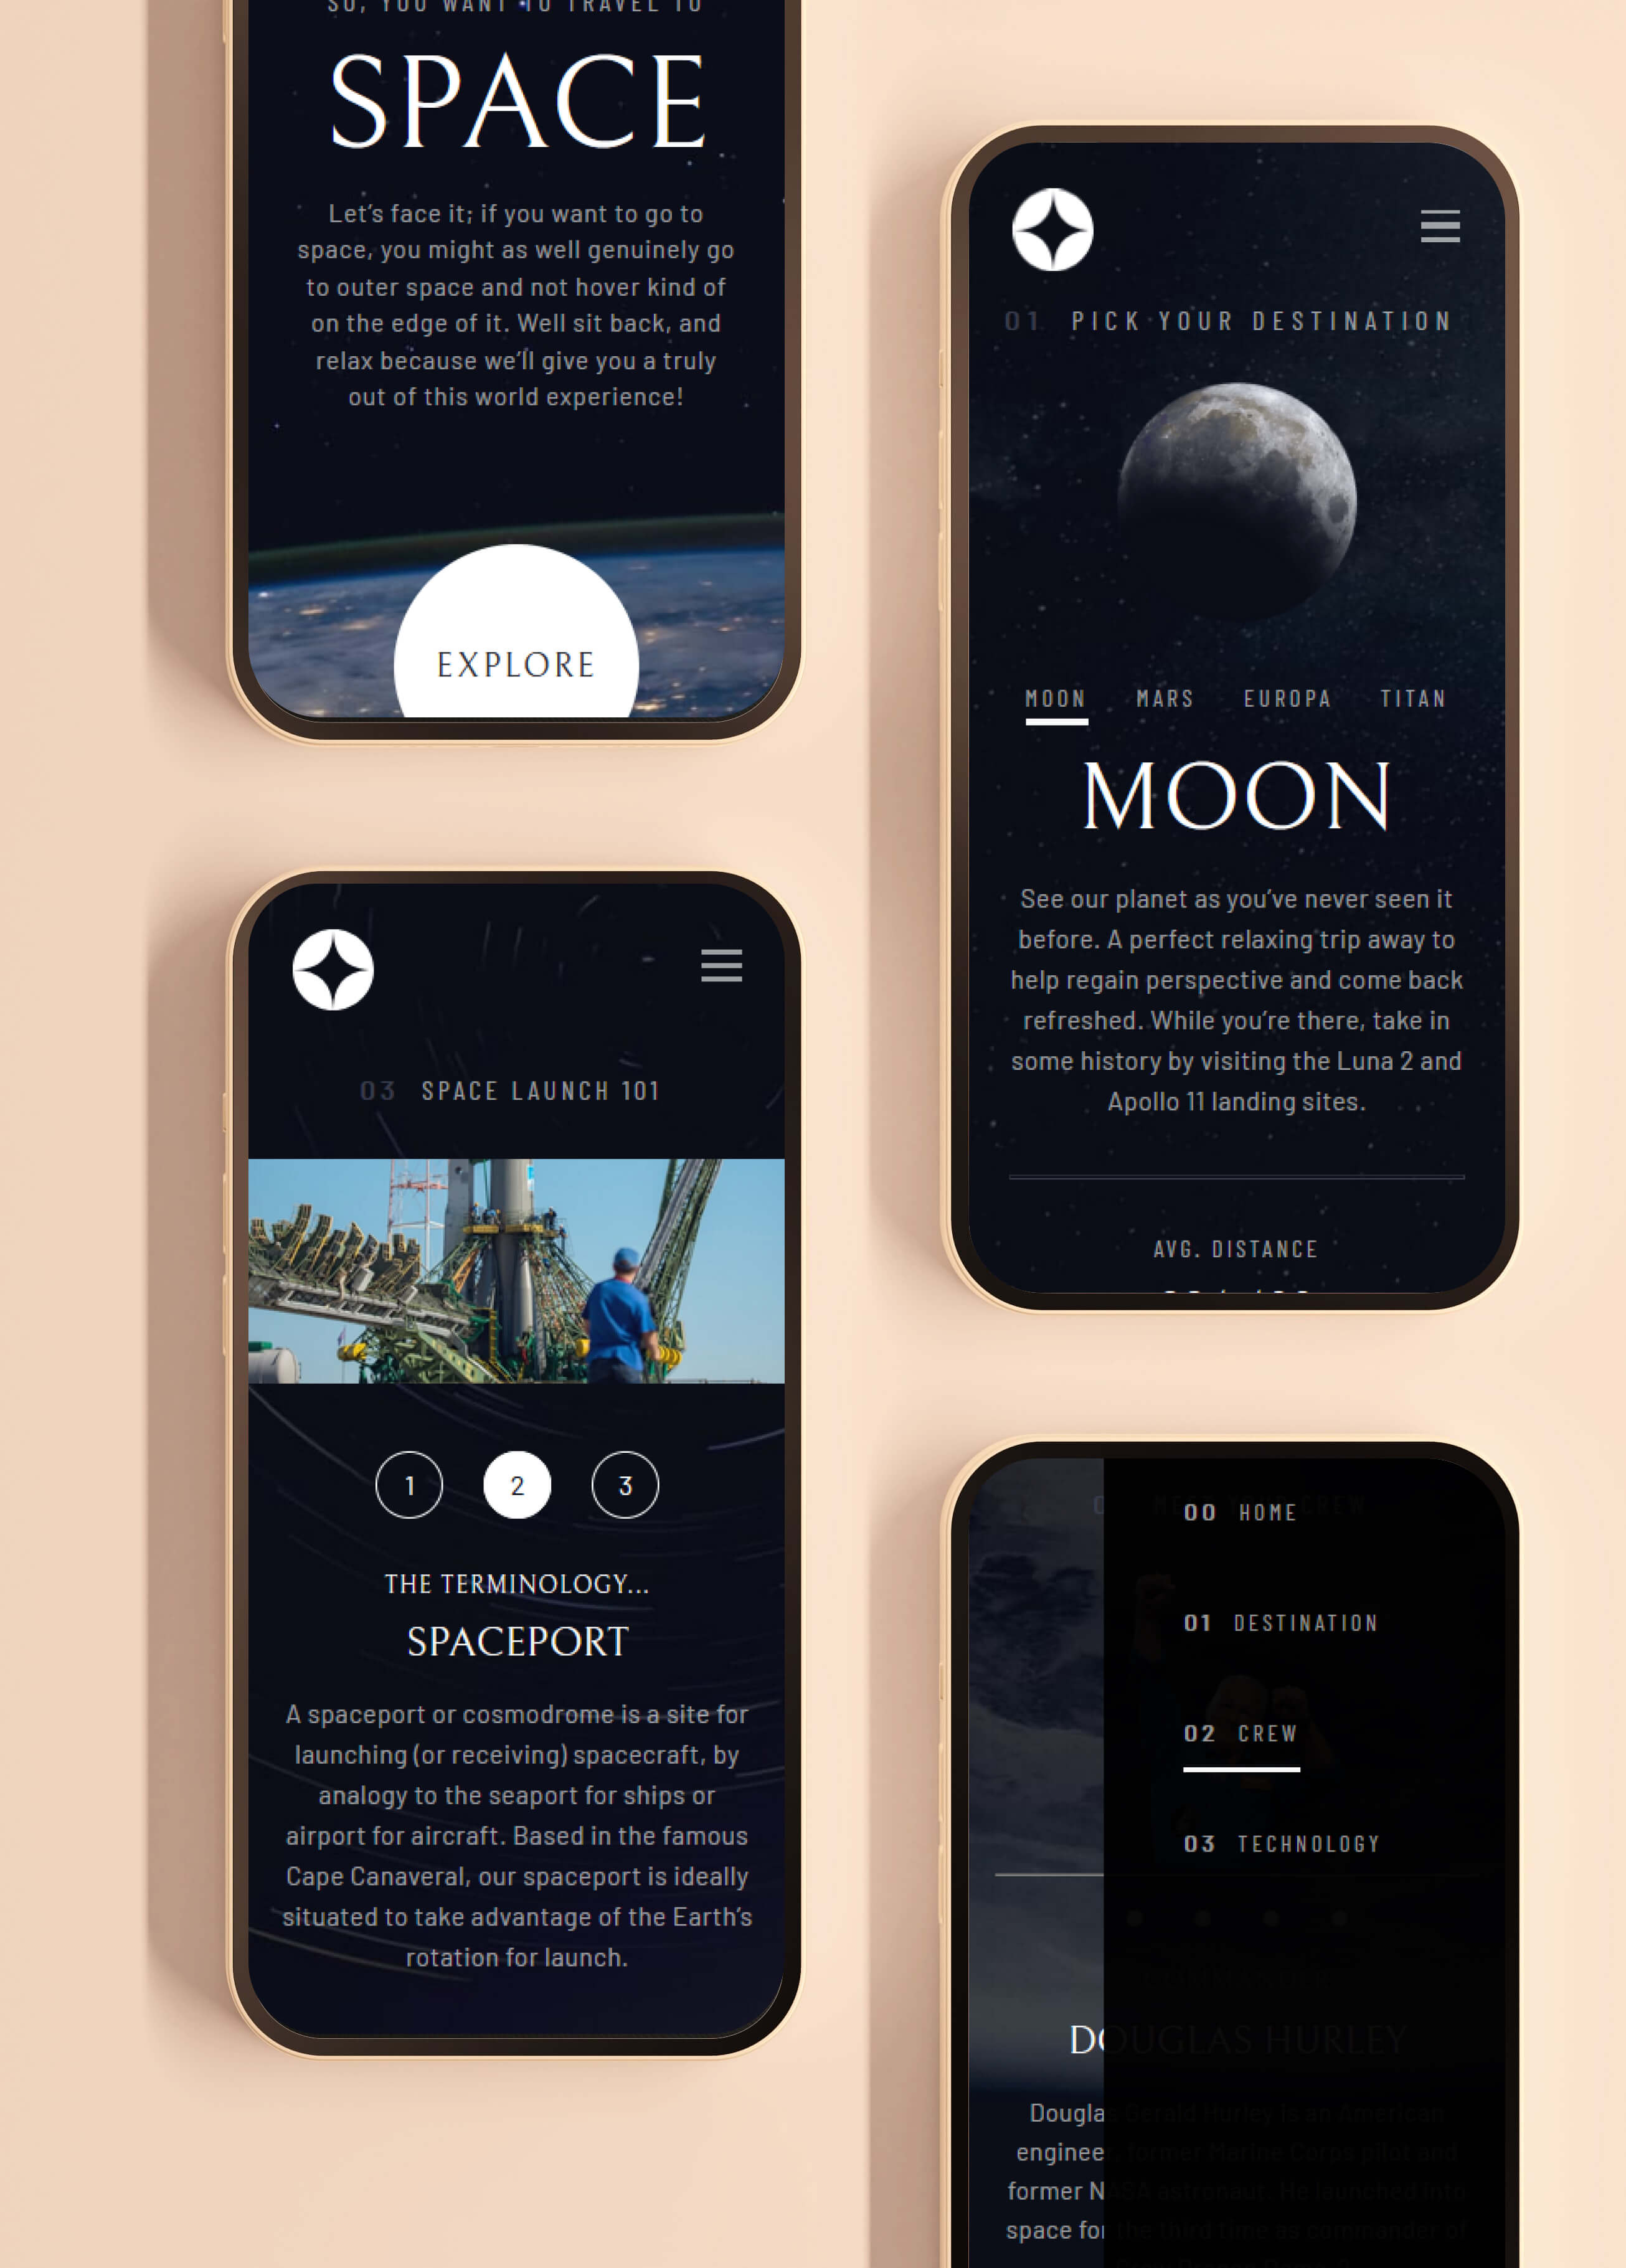 Space website - mobile device